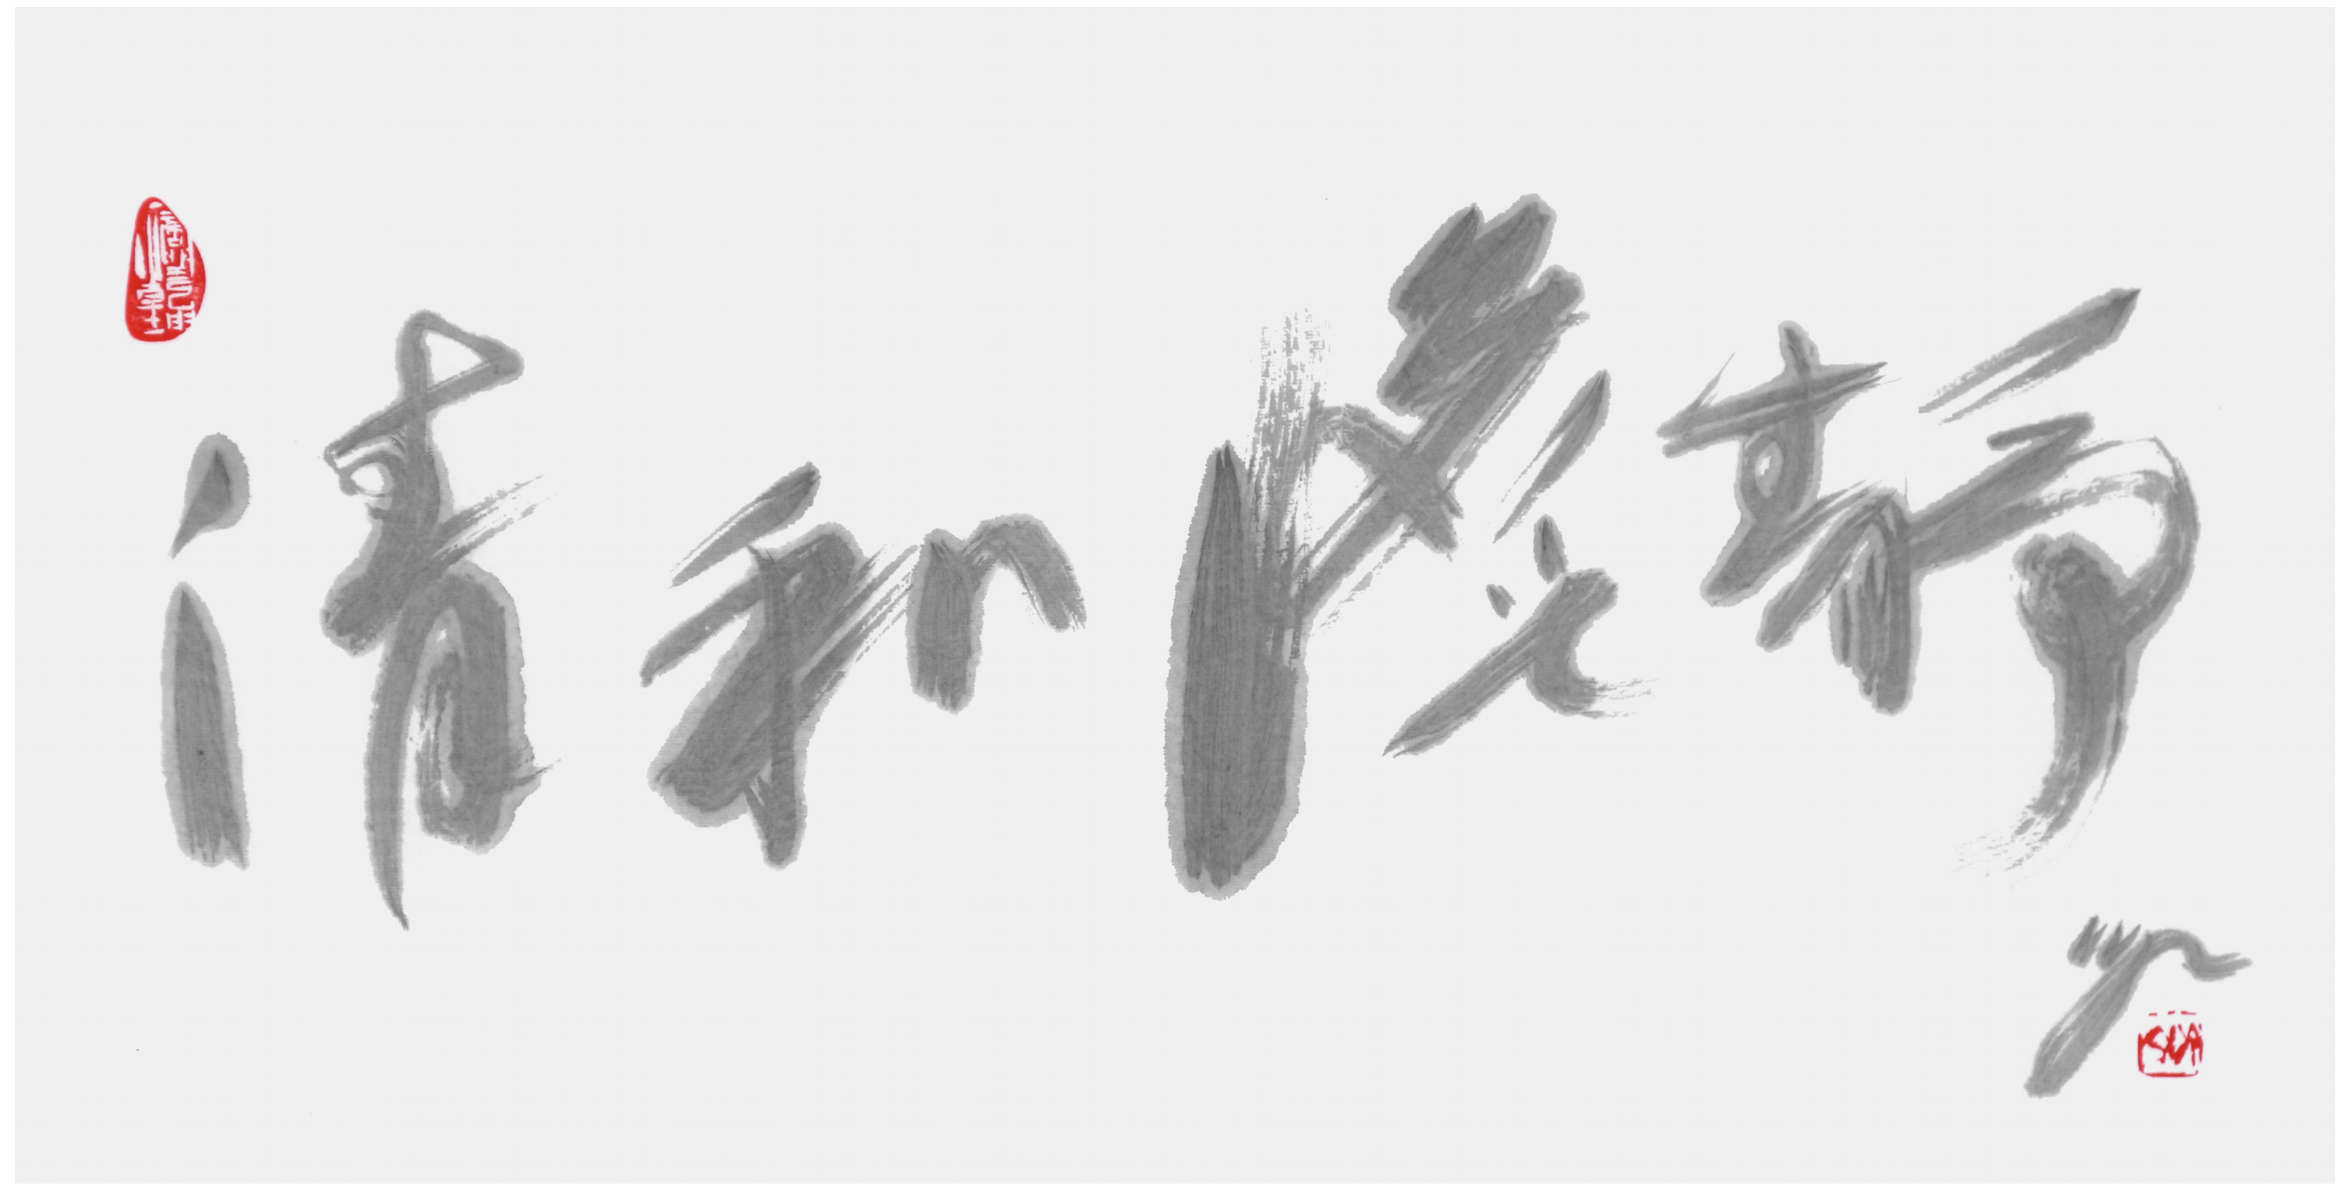 Sai Koh (Qi Hong)’s freehand brushwork Chinese calligraphy (light ink calligraphy, Cursive script): Tea Culture Is Focusing on Harmony and Tranquility and Aiming at Eliminating any Distractions instead of Seeking Fame and Wealth, 69×34cm, ink on Mian Liao Mian Lian Xuan paper